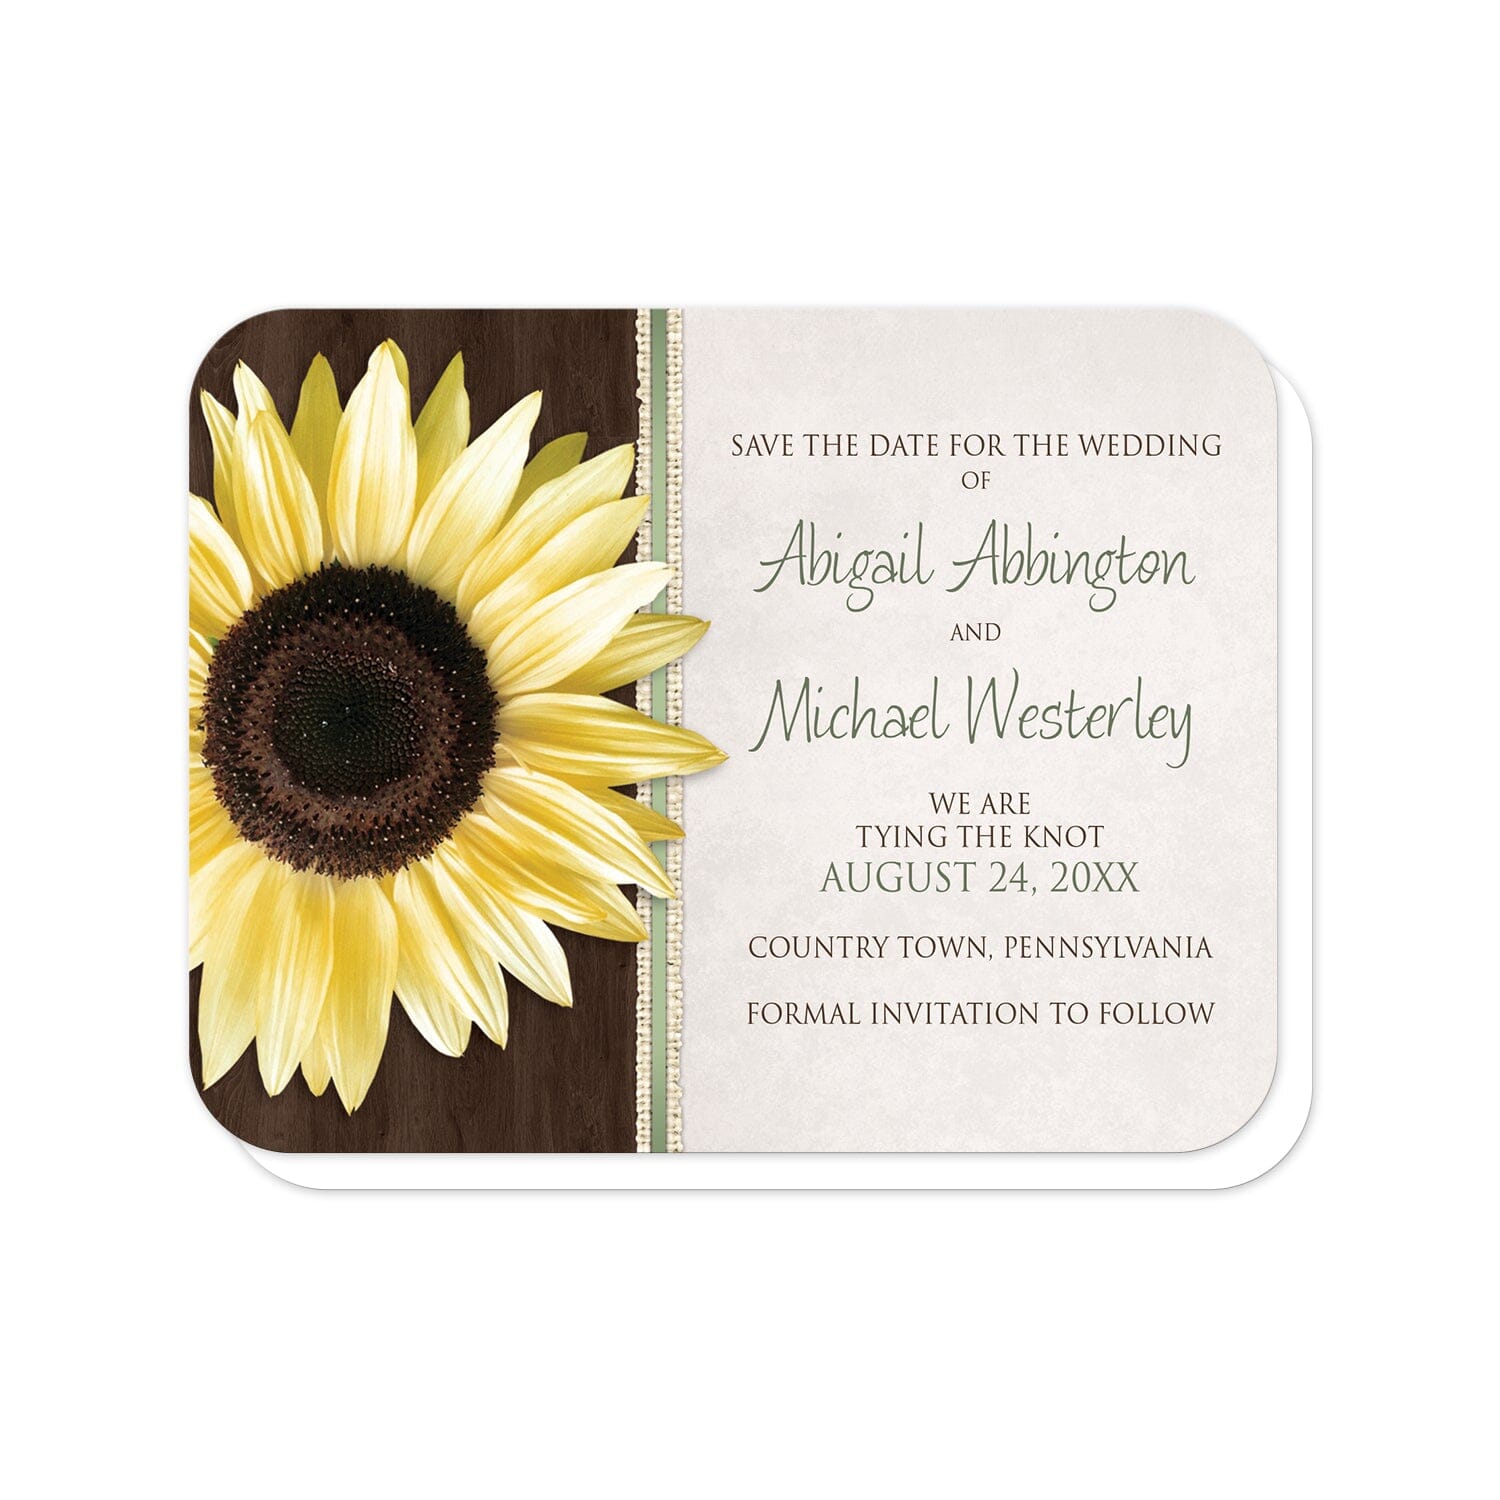 Country Sunflower Wood Brown Green Save the Date Cards (with rounded corners) at Artistically Invited. Country sunflower wood brown green save the date cards in a floral southern style, with a big yellow sunflower over a dark brown wood pattern illustration on the left side with burlap strips and green stripes beside it. Your personalized wedding announcement details are custom printed in green and brown over a beige parchment design to the right of the sunflower.